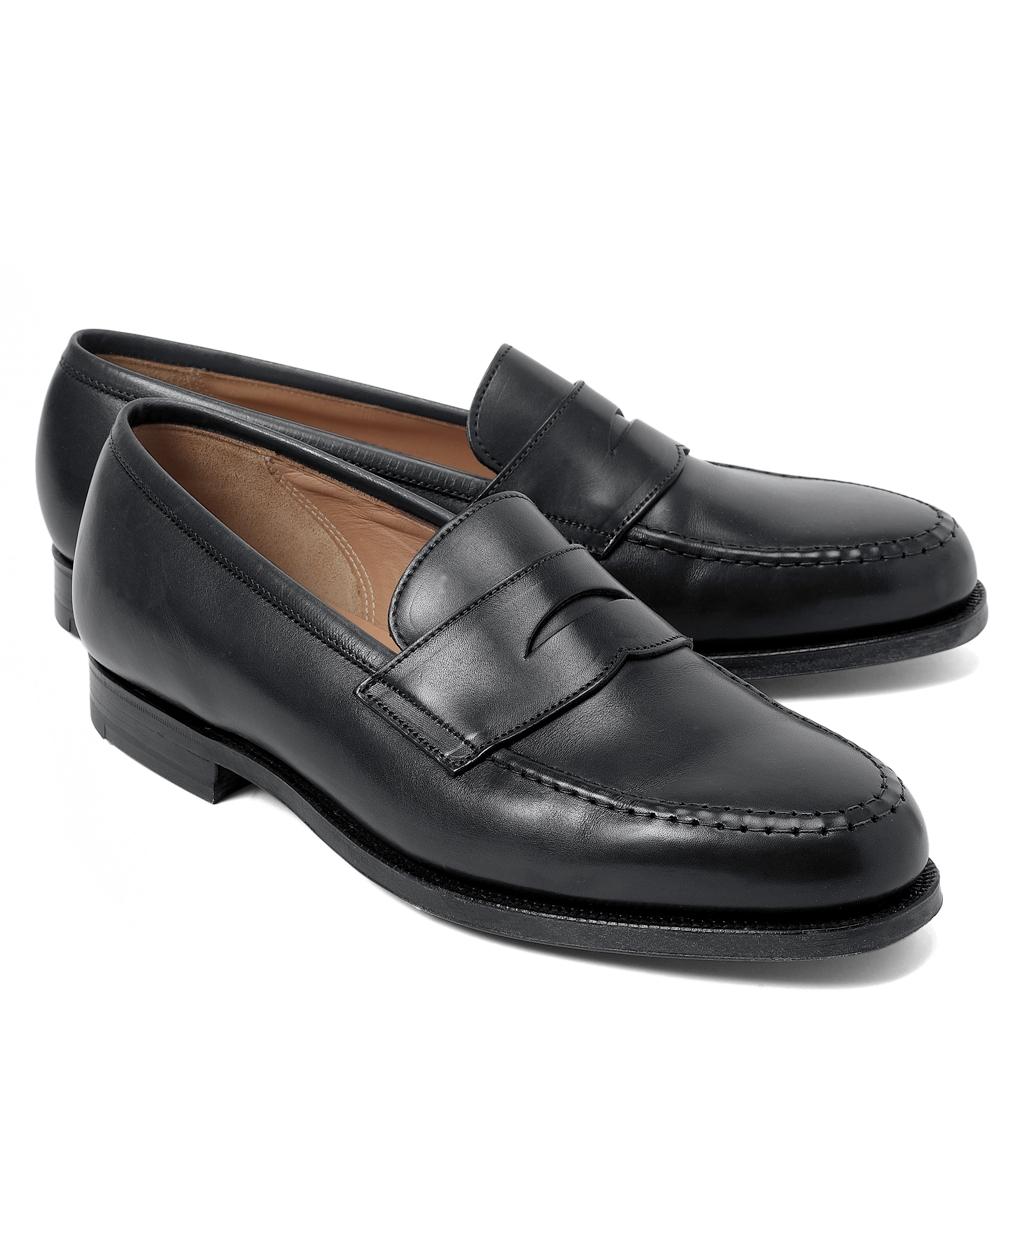 Lyst - Brooks brothers Peal & Co.® Penny Loafers in Black for Men